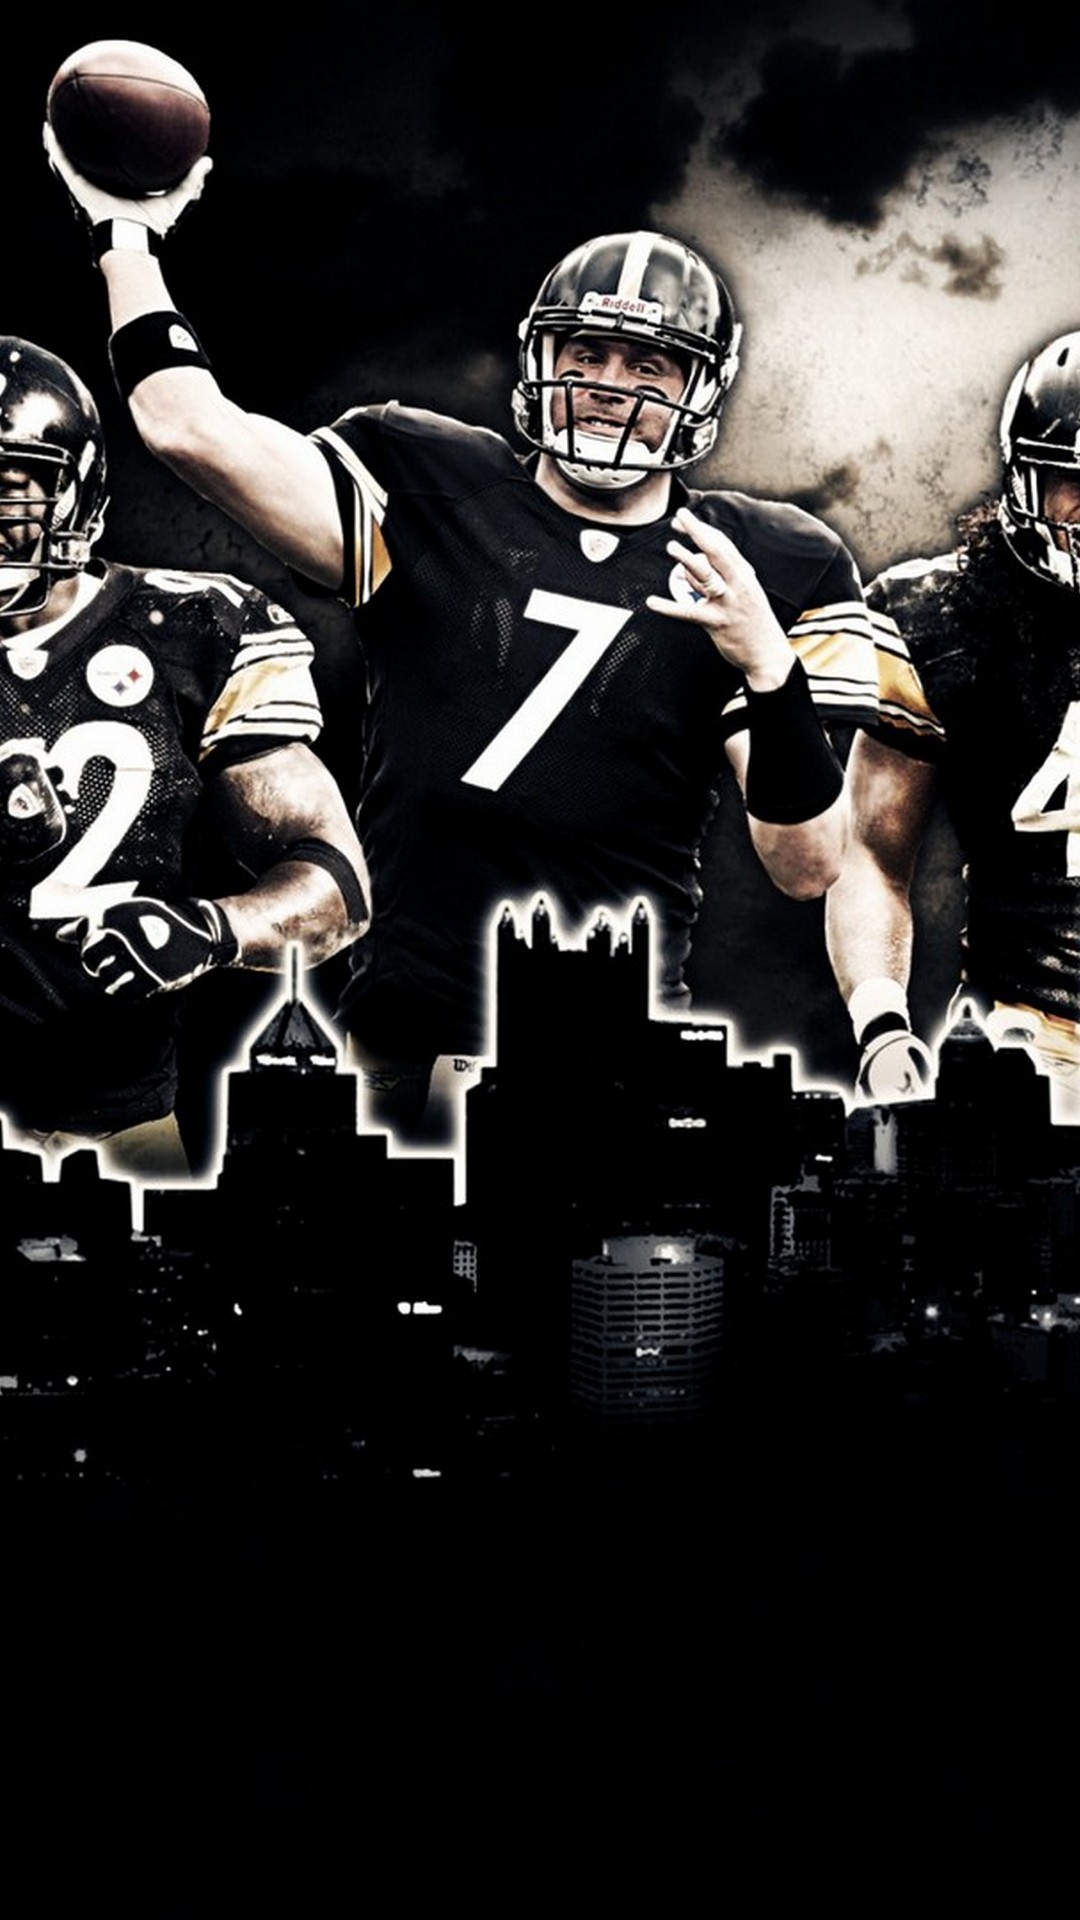 iPhone Wallpaper HD Pittsburgh Steelers With high-resolution 1080X1920 pixel. You can use this wallpaper for your Mac or Windows Desktop Background, iPhone, Android or Tablet and another Smartphone device